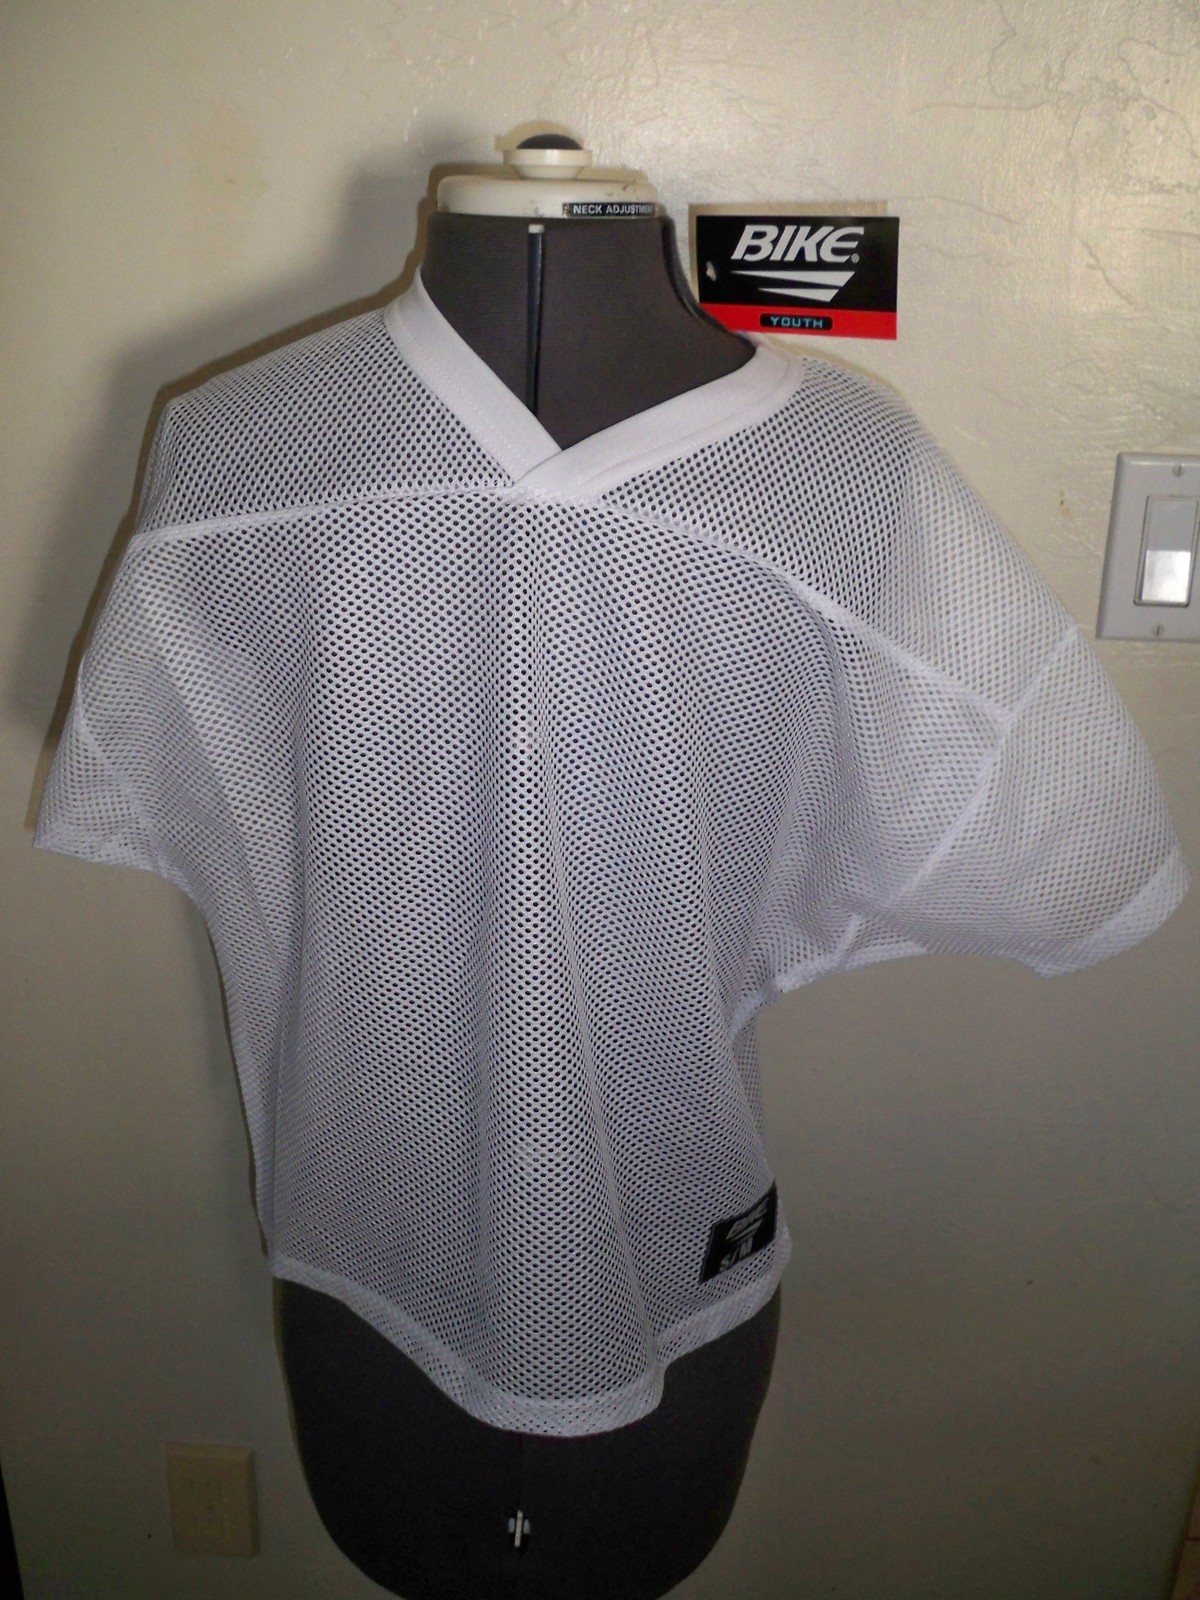 BIKE YOUTH BOY'S FOOTBALL PRACTICE MESH JERSEY TOP WHITE NEW $25 - $16.99